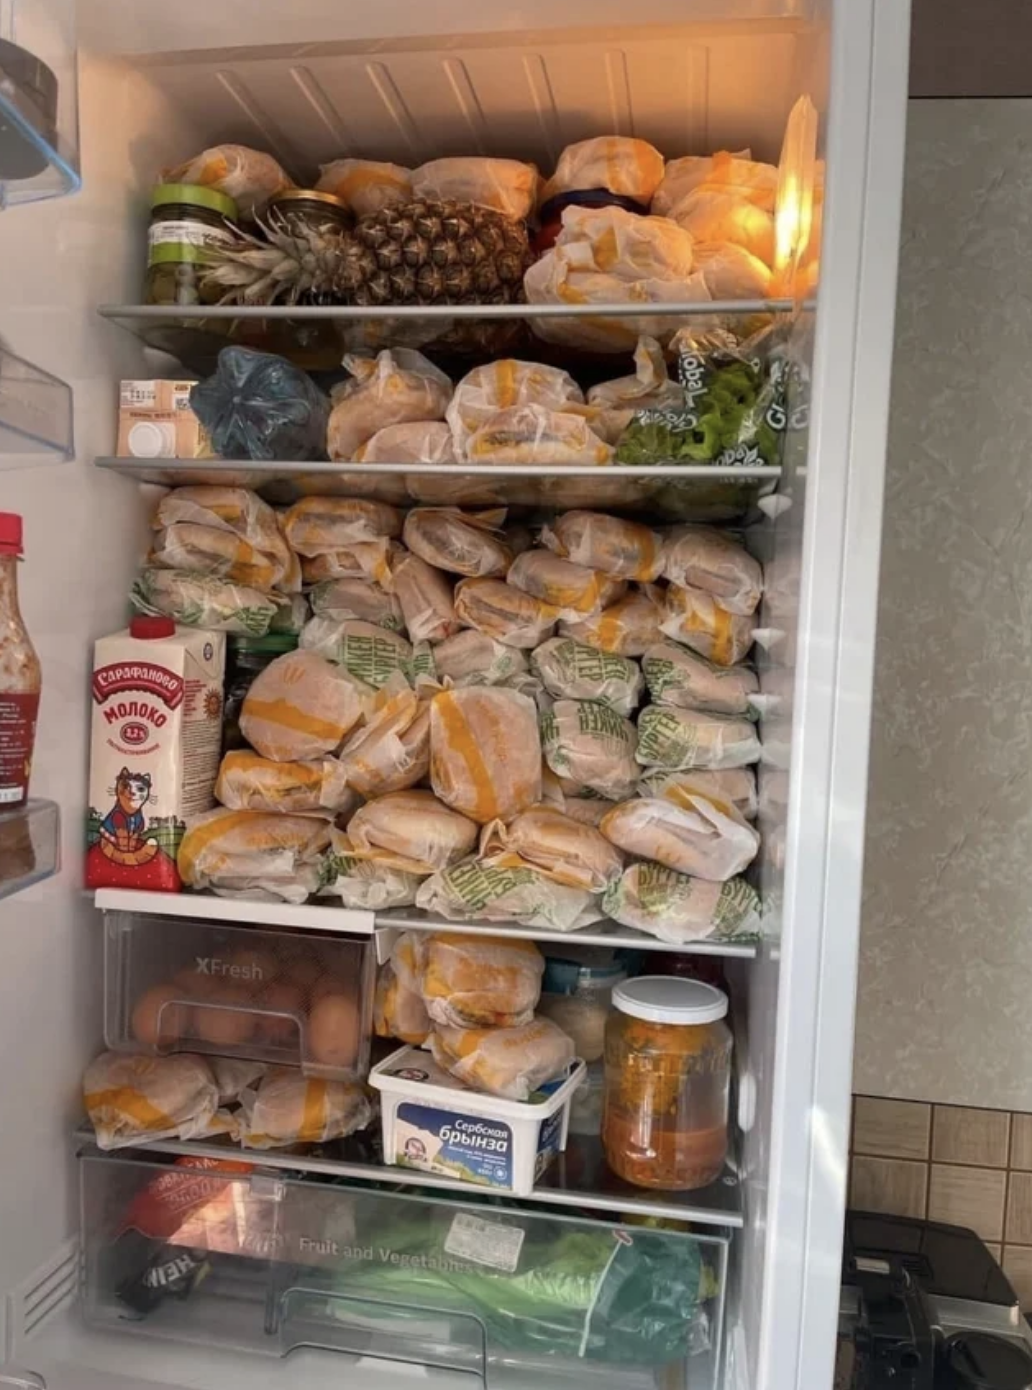 A refrigerator packed with wrapped burgers alongside other food